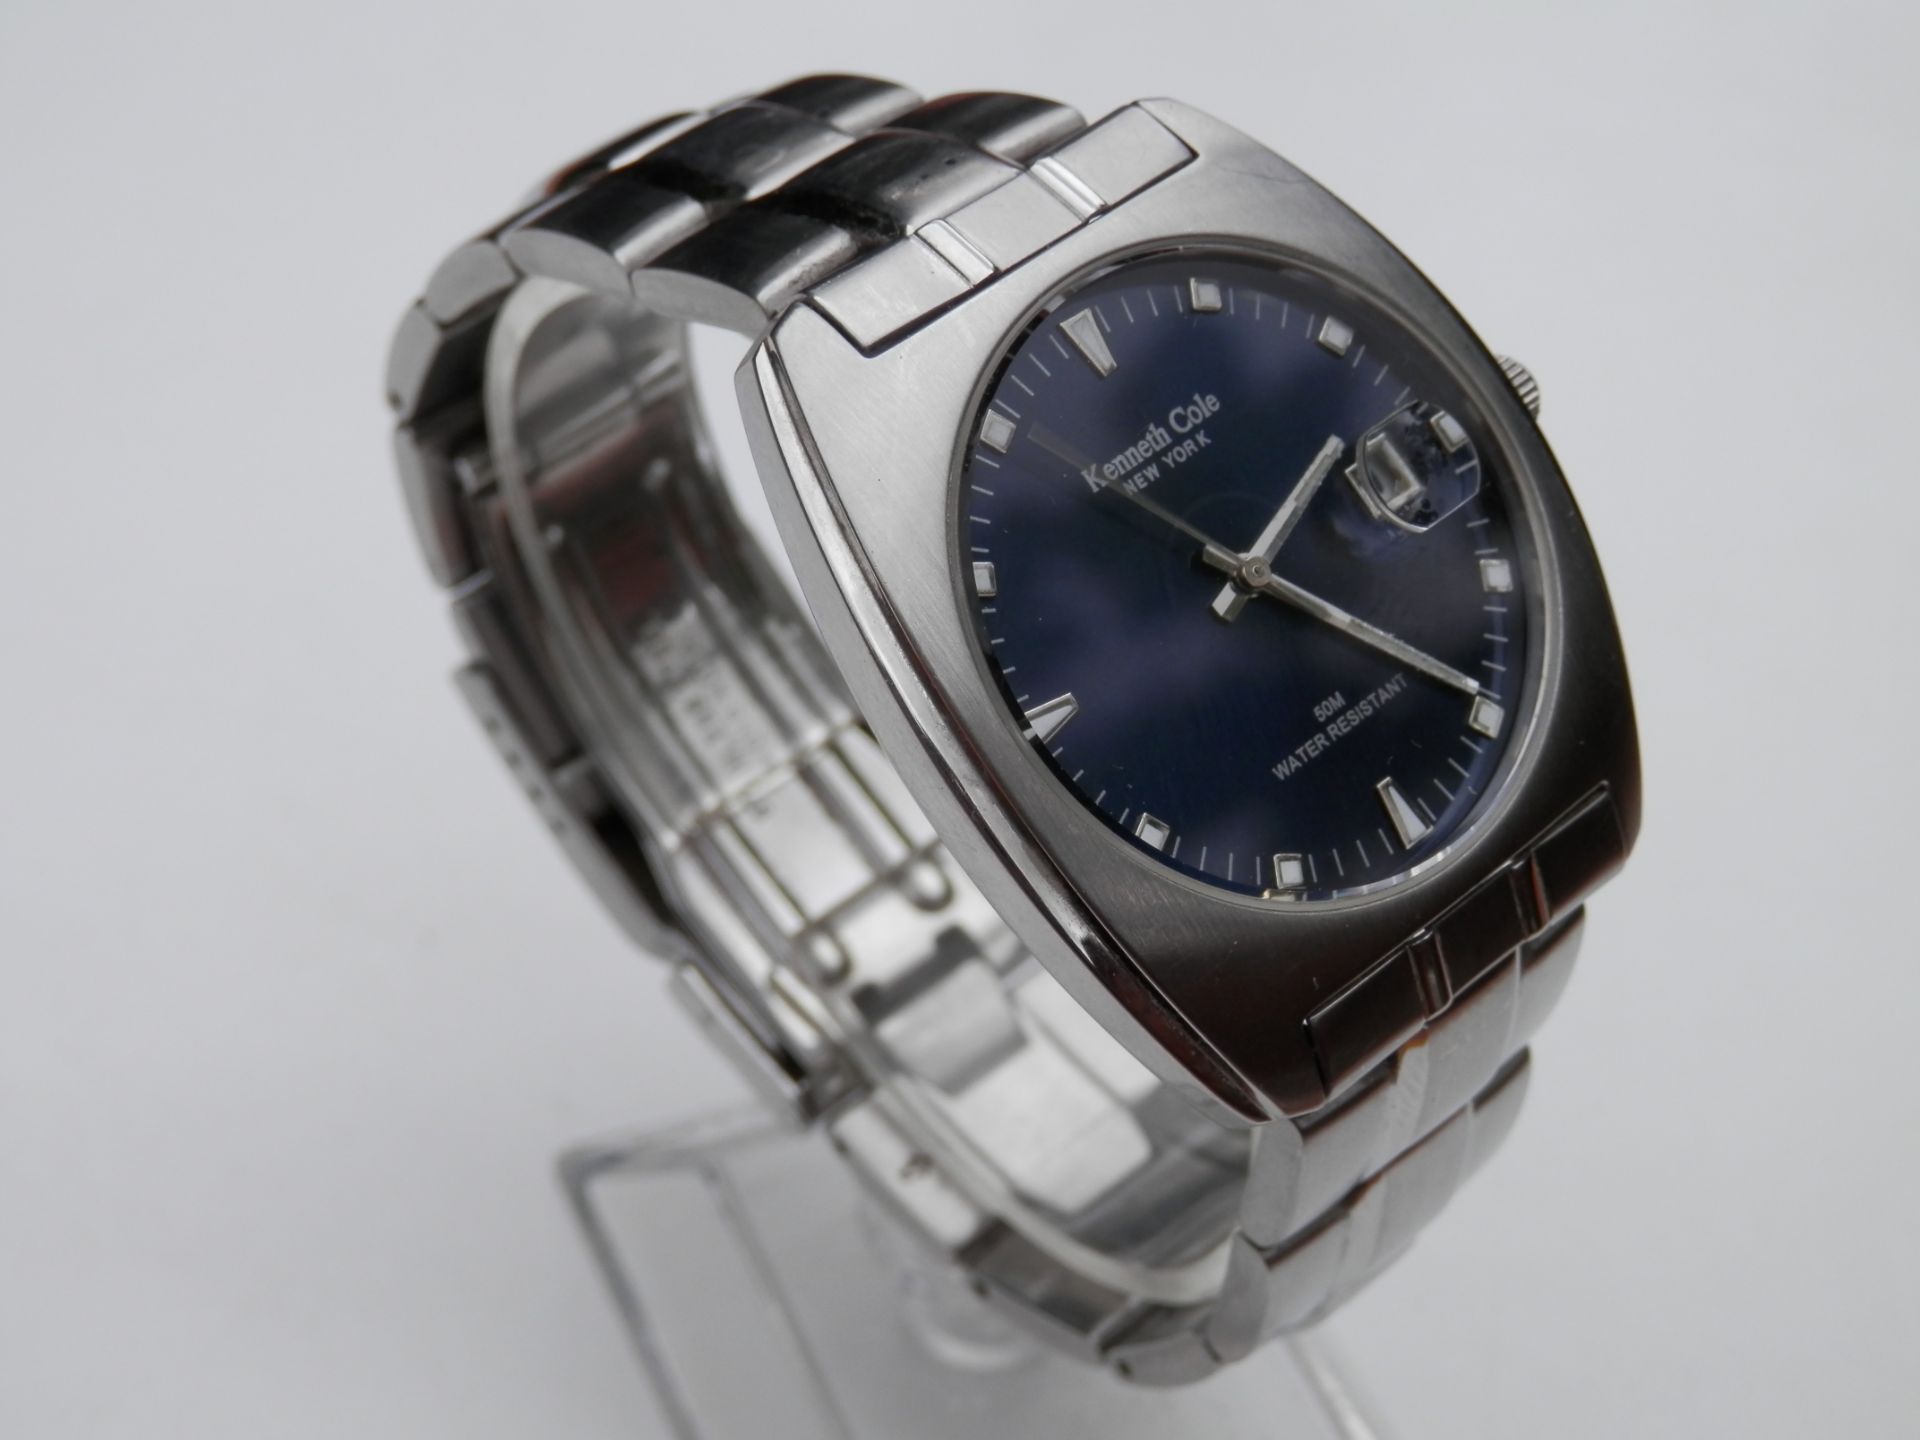 GENTS BOXED KENNETH COLE NEW YORK, FULL STAINLESS 50M WR QUARTZ DATE WATCH, FULLY WORKING. RRP $125 - Image 6 of 11